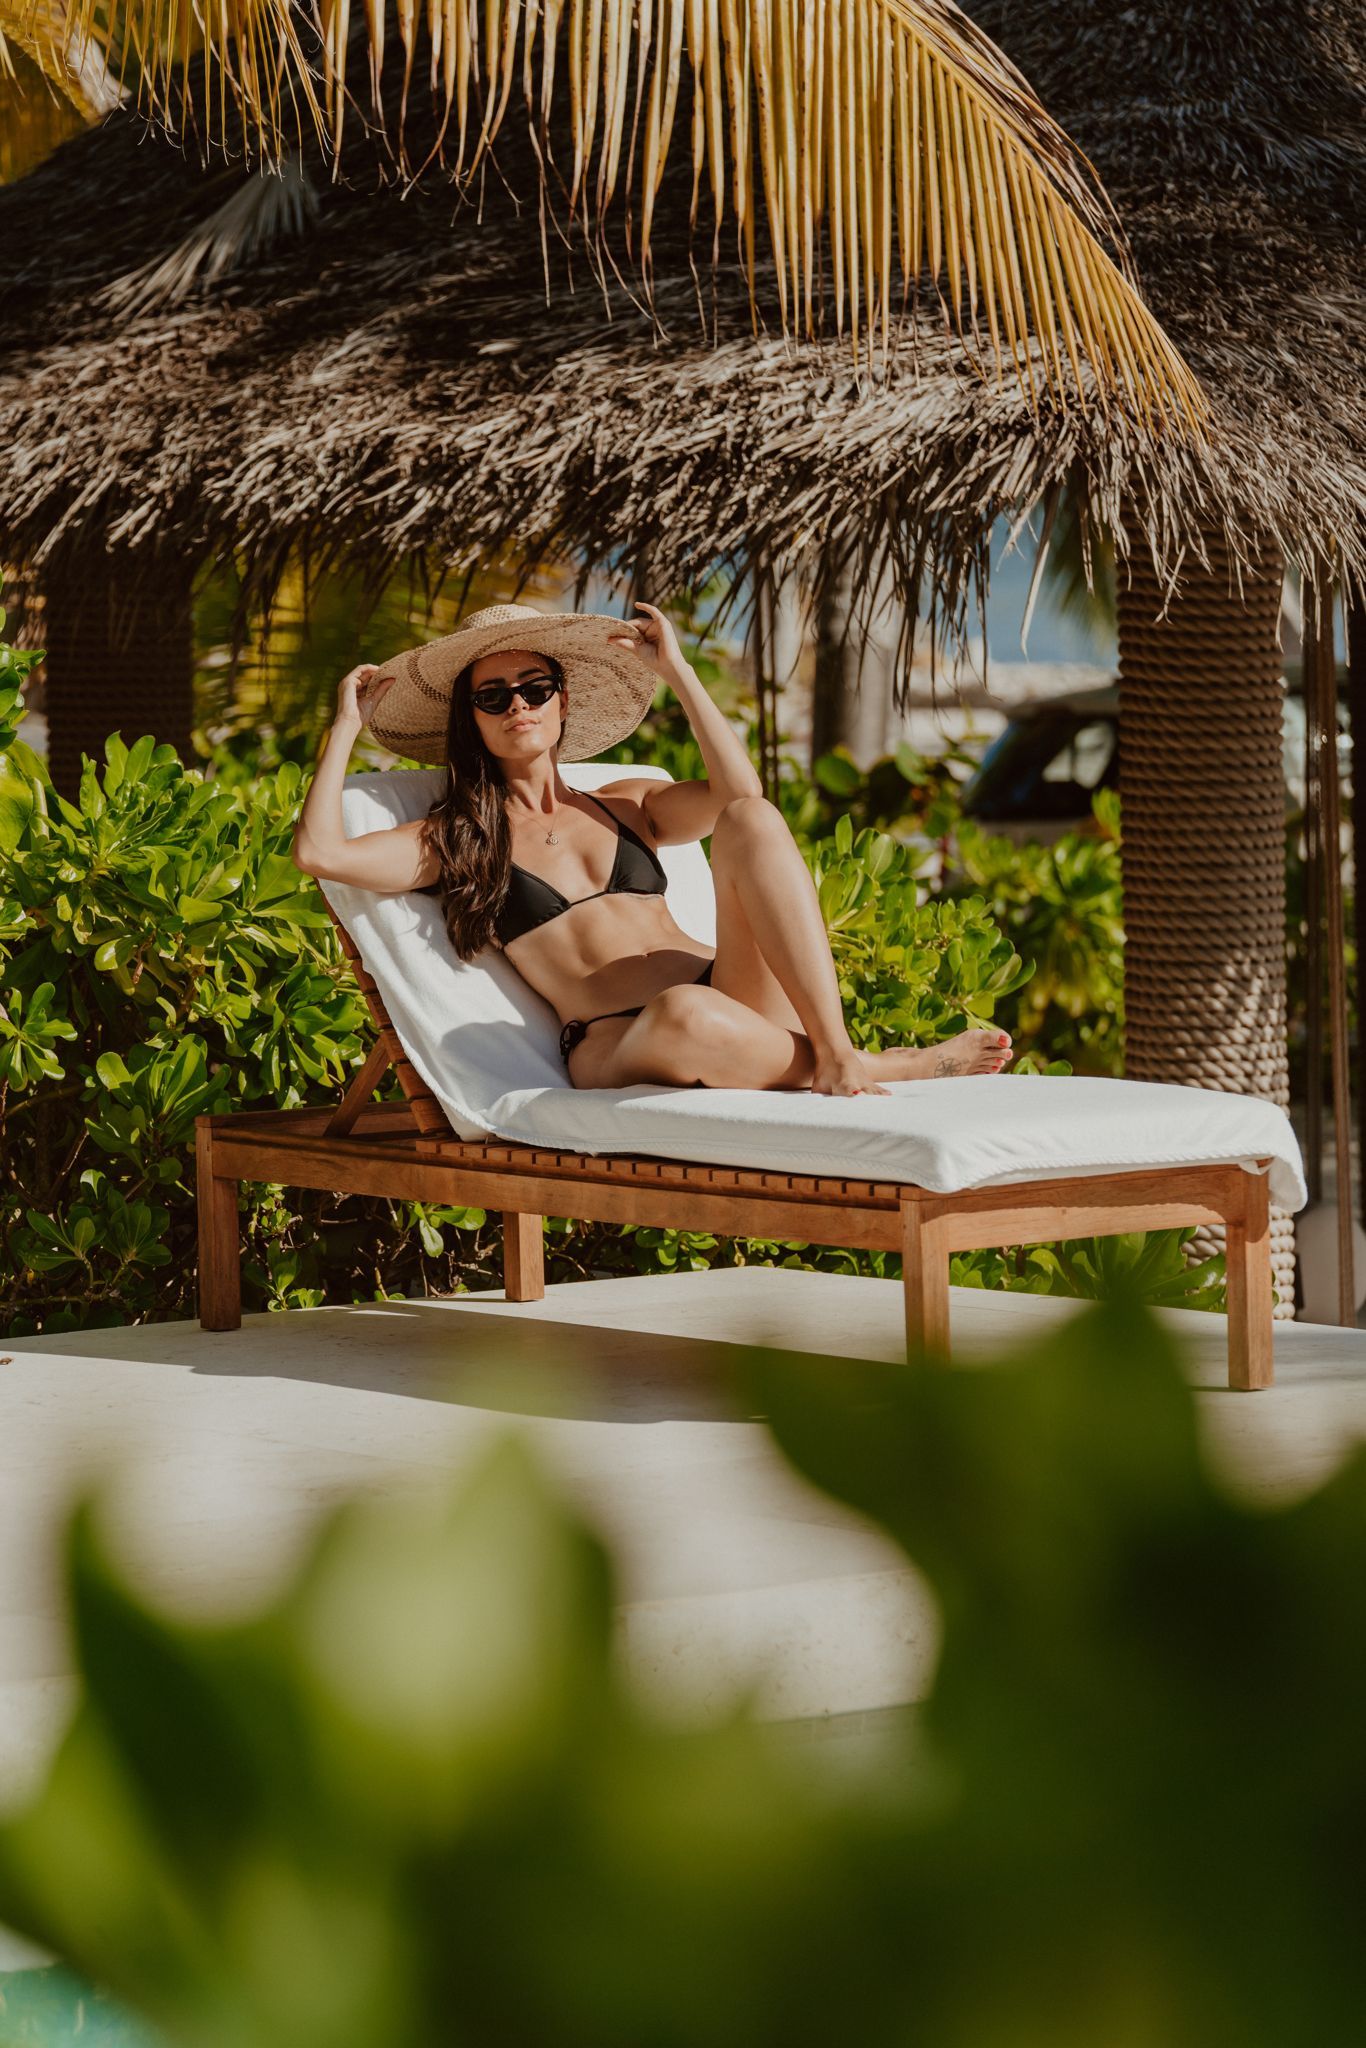 a woman in a bikini is sitting on a lounge chair under a palm tree